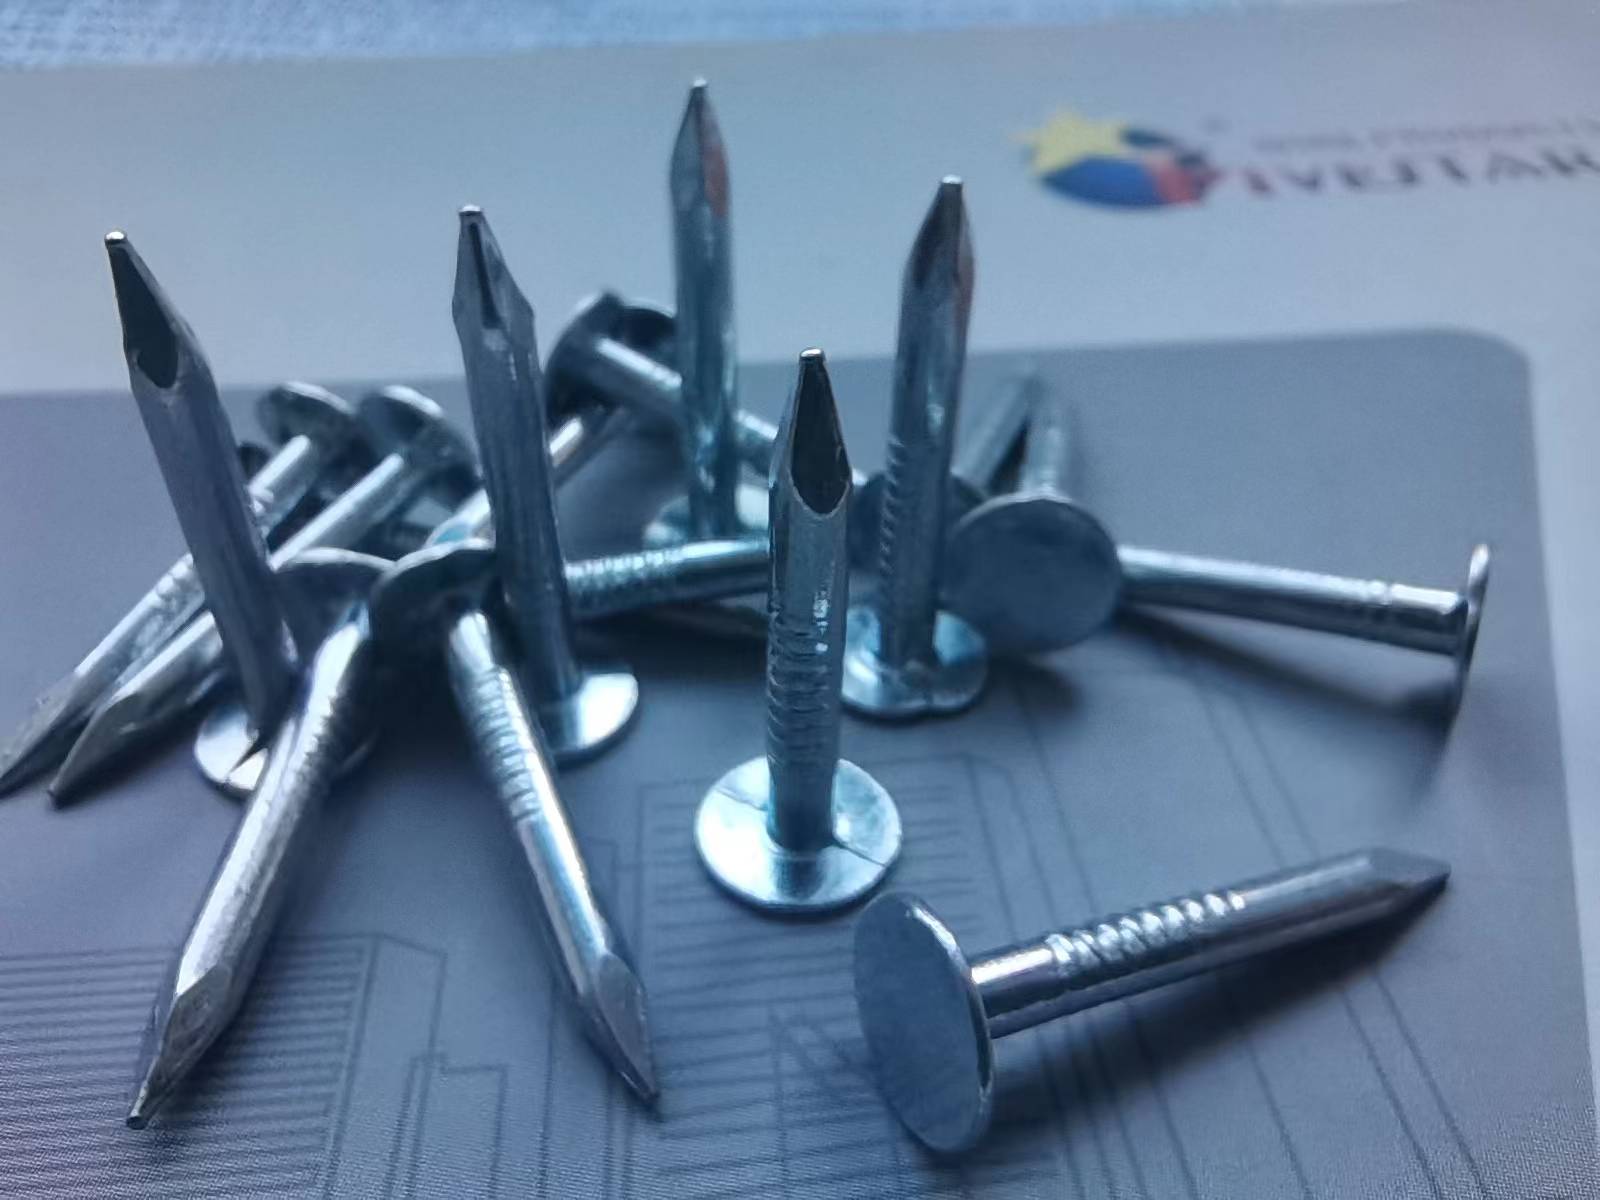 1-1/4" roofing nails china manufacturer .1" roofing nails manufacturer.11guage